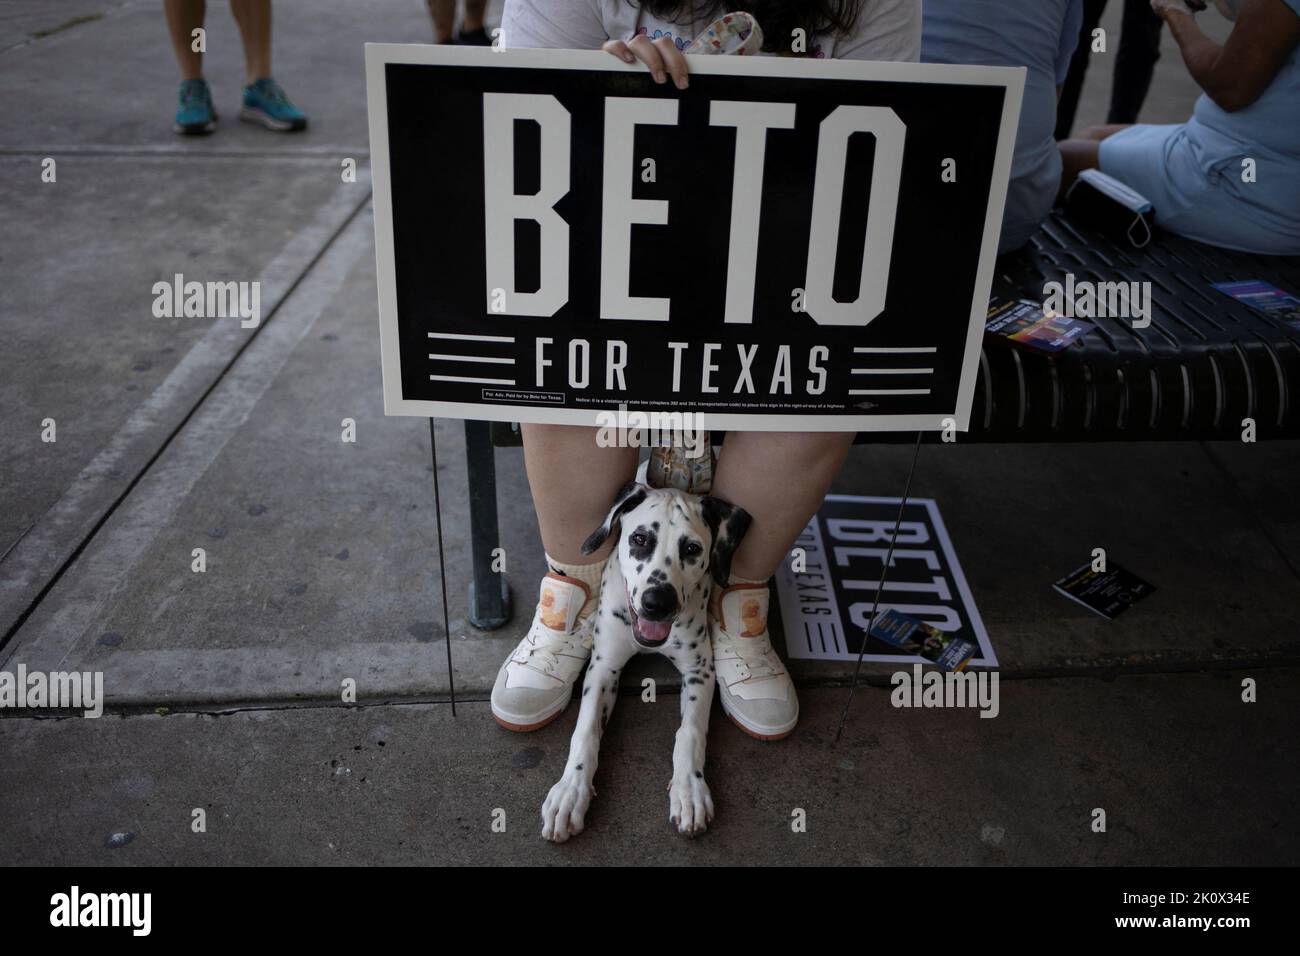 Isla, a four month old Dalmatian, sits near her owner as they await the start of a campaign event for Texas Democratic gubernatorial candidate and former U.S. congressman Beto O'Rourke in Houston, Texas, U.S. September 13, 2022. REUTERS/Adrees Latif Stock Photo